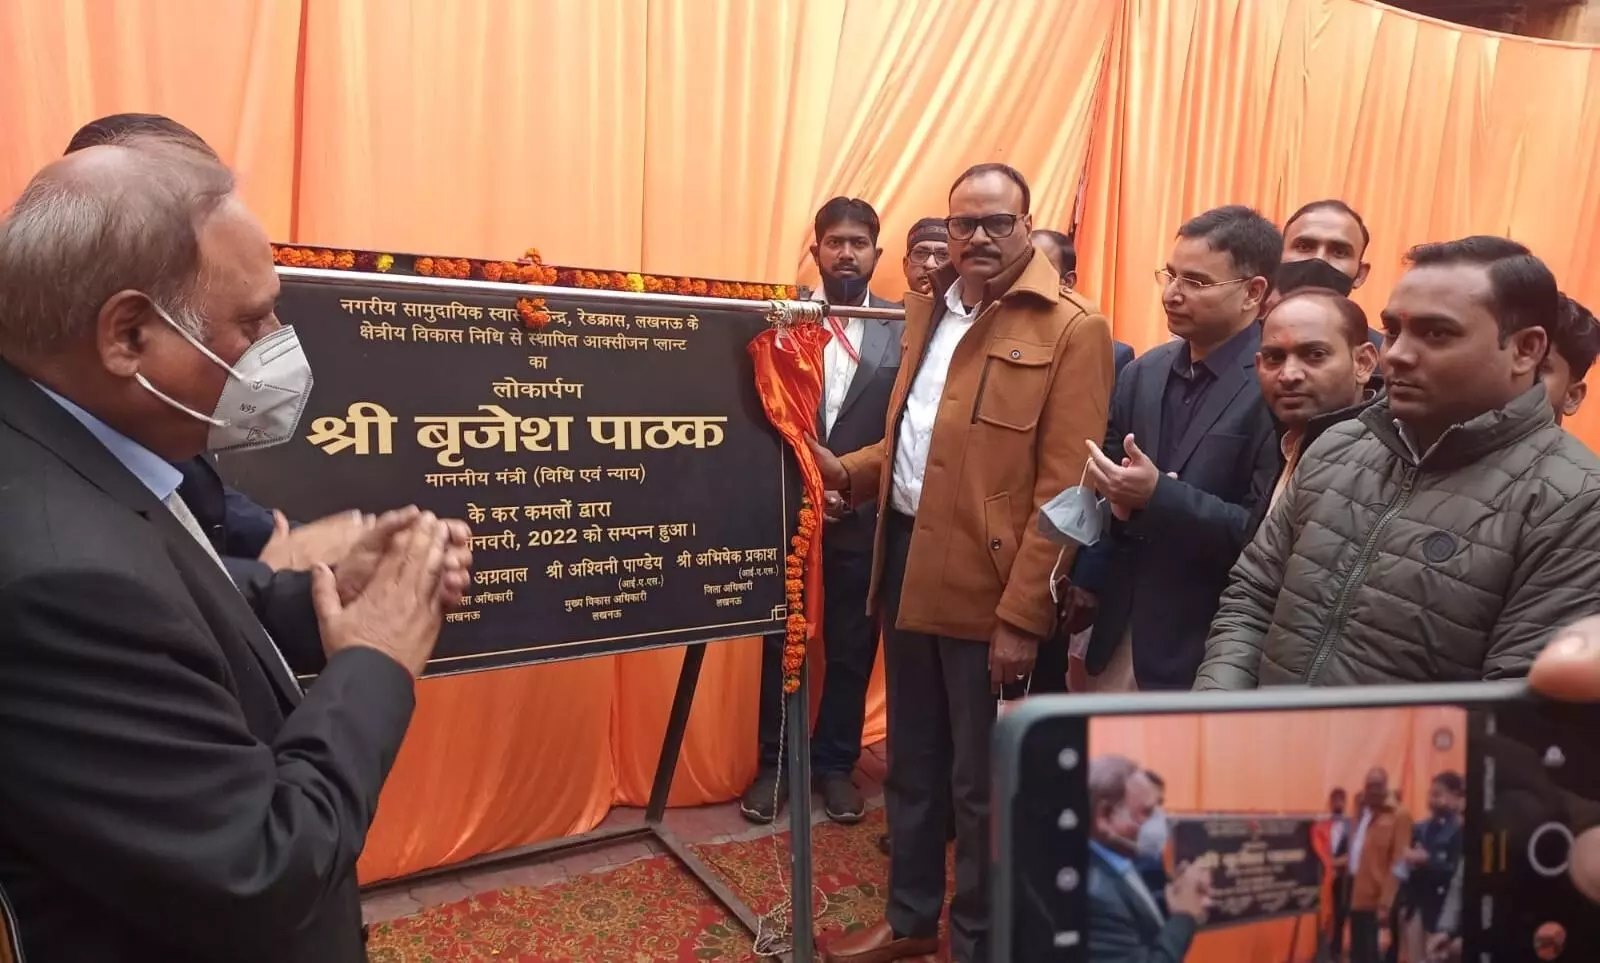 Cabinet Minister Brijesh Pathak inaugurated the oxygen plant